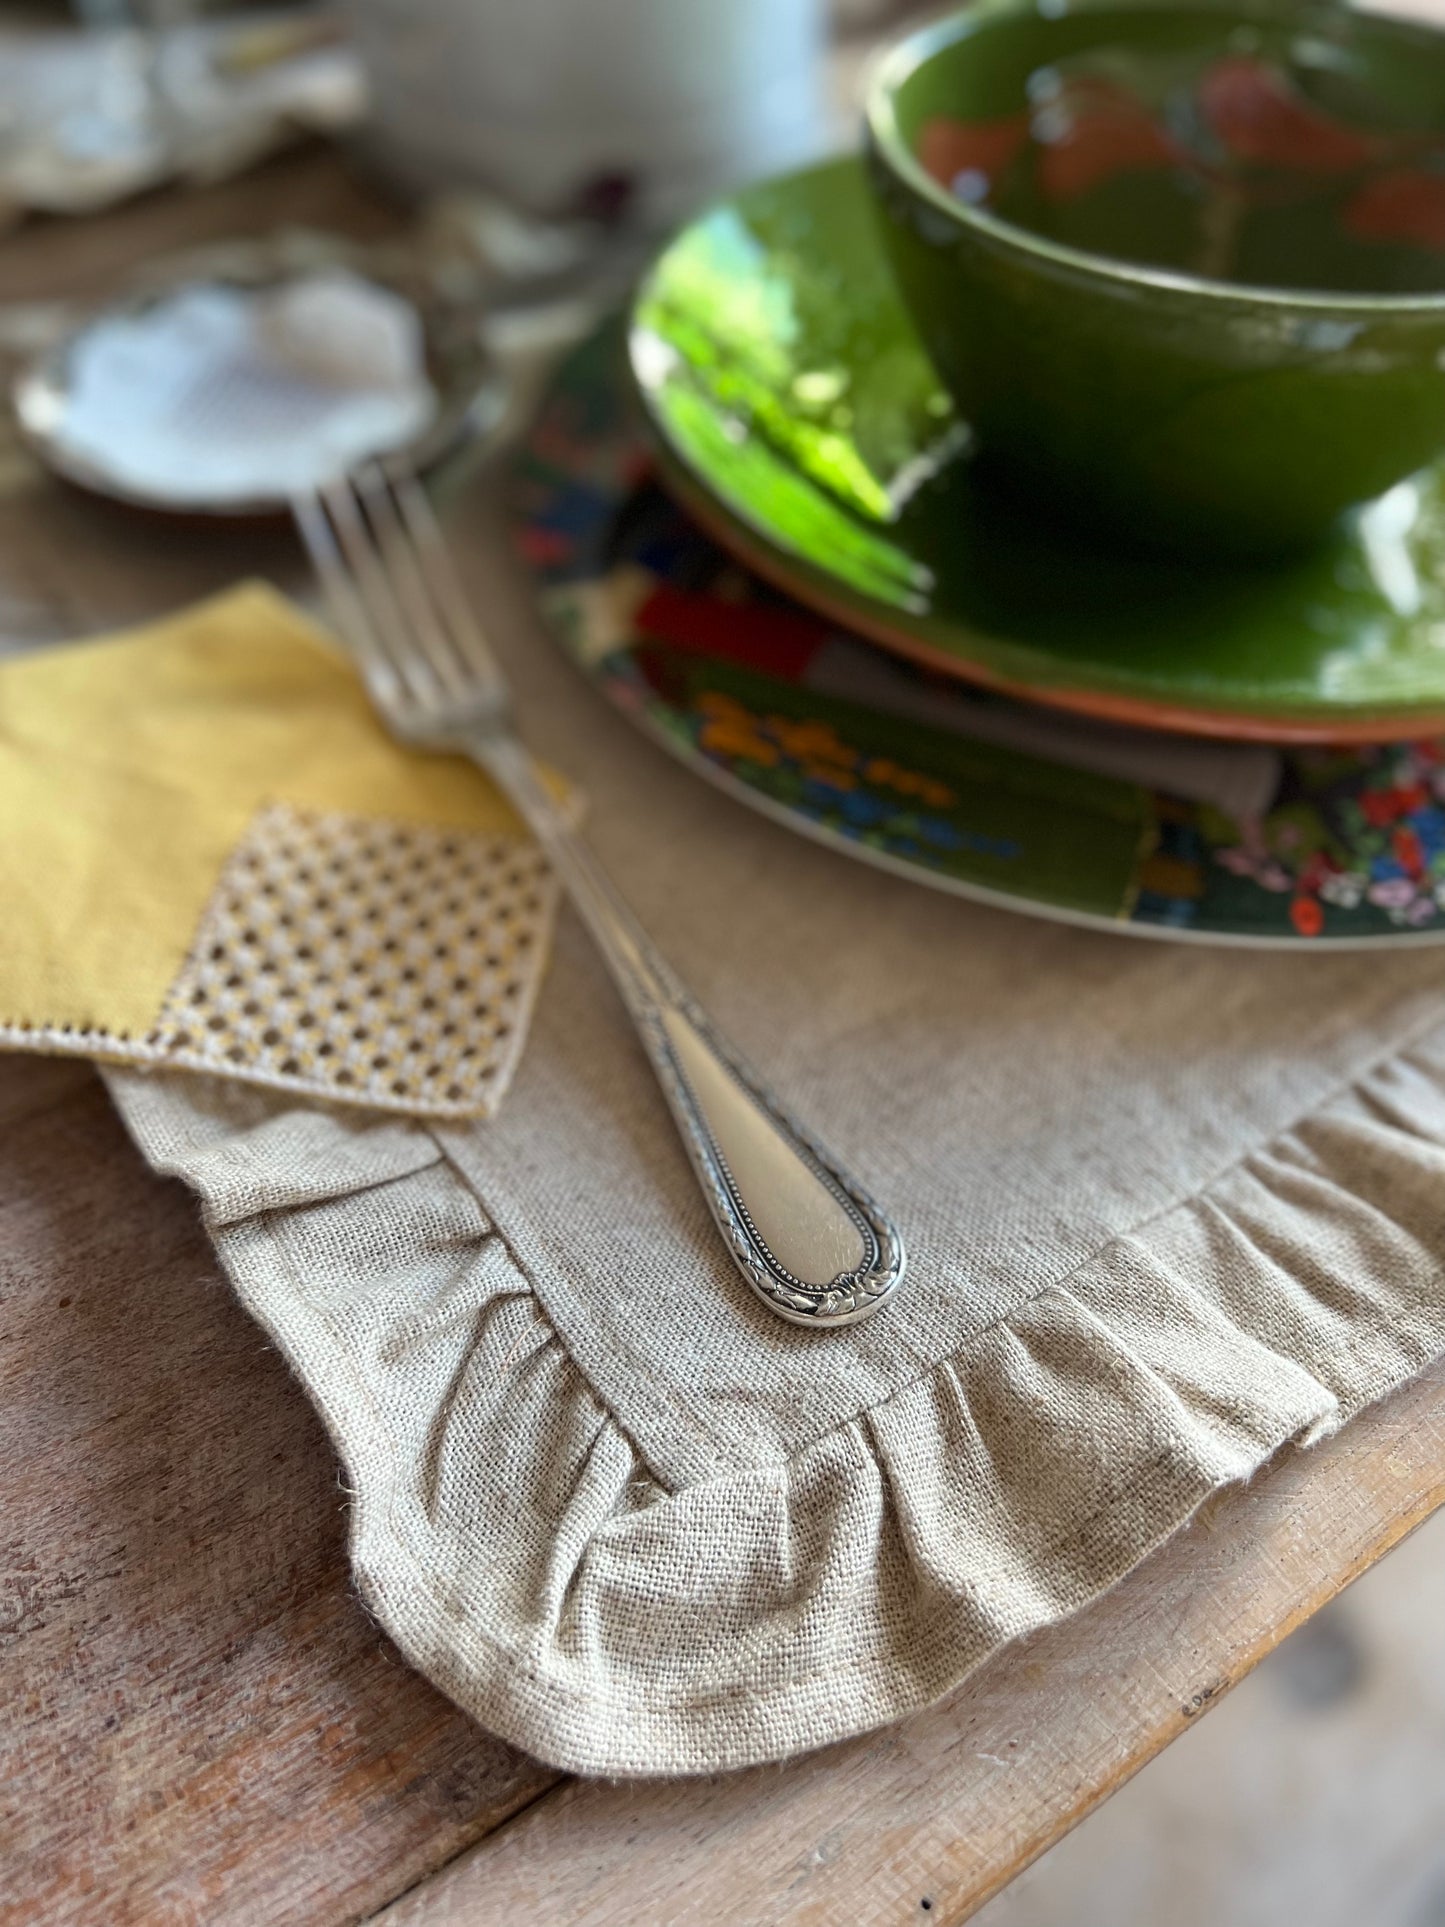 INDIVIDUAL TABLECLOTH WITH BEIGE LINEN RUFFLES